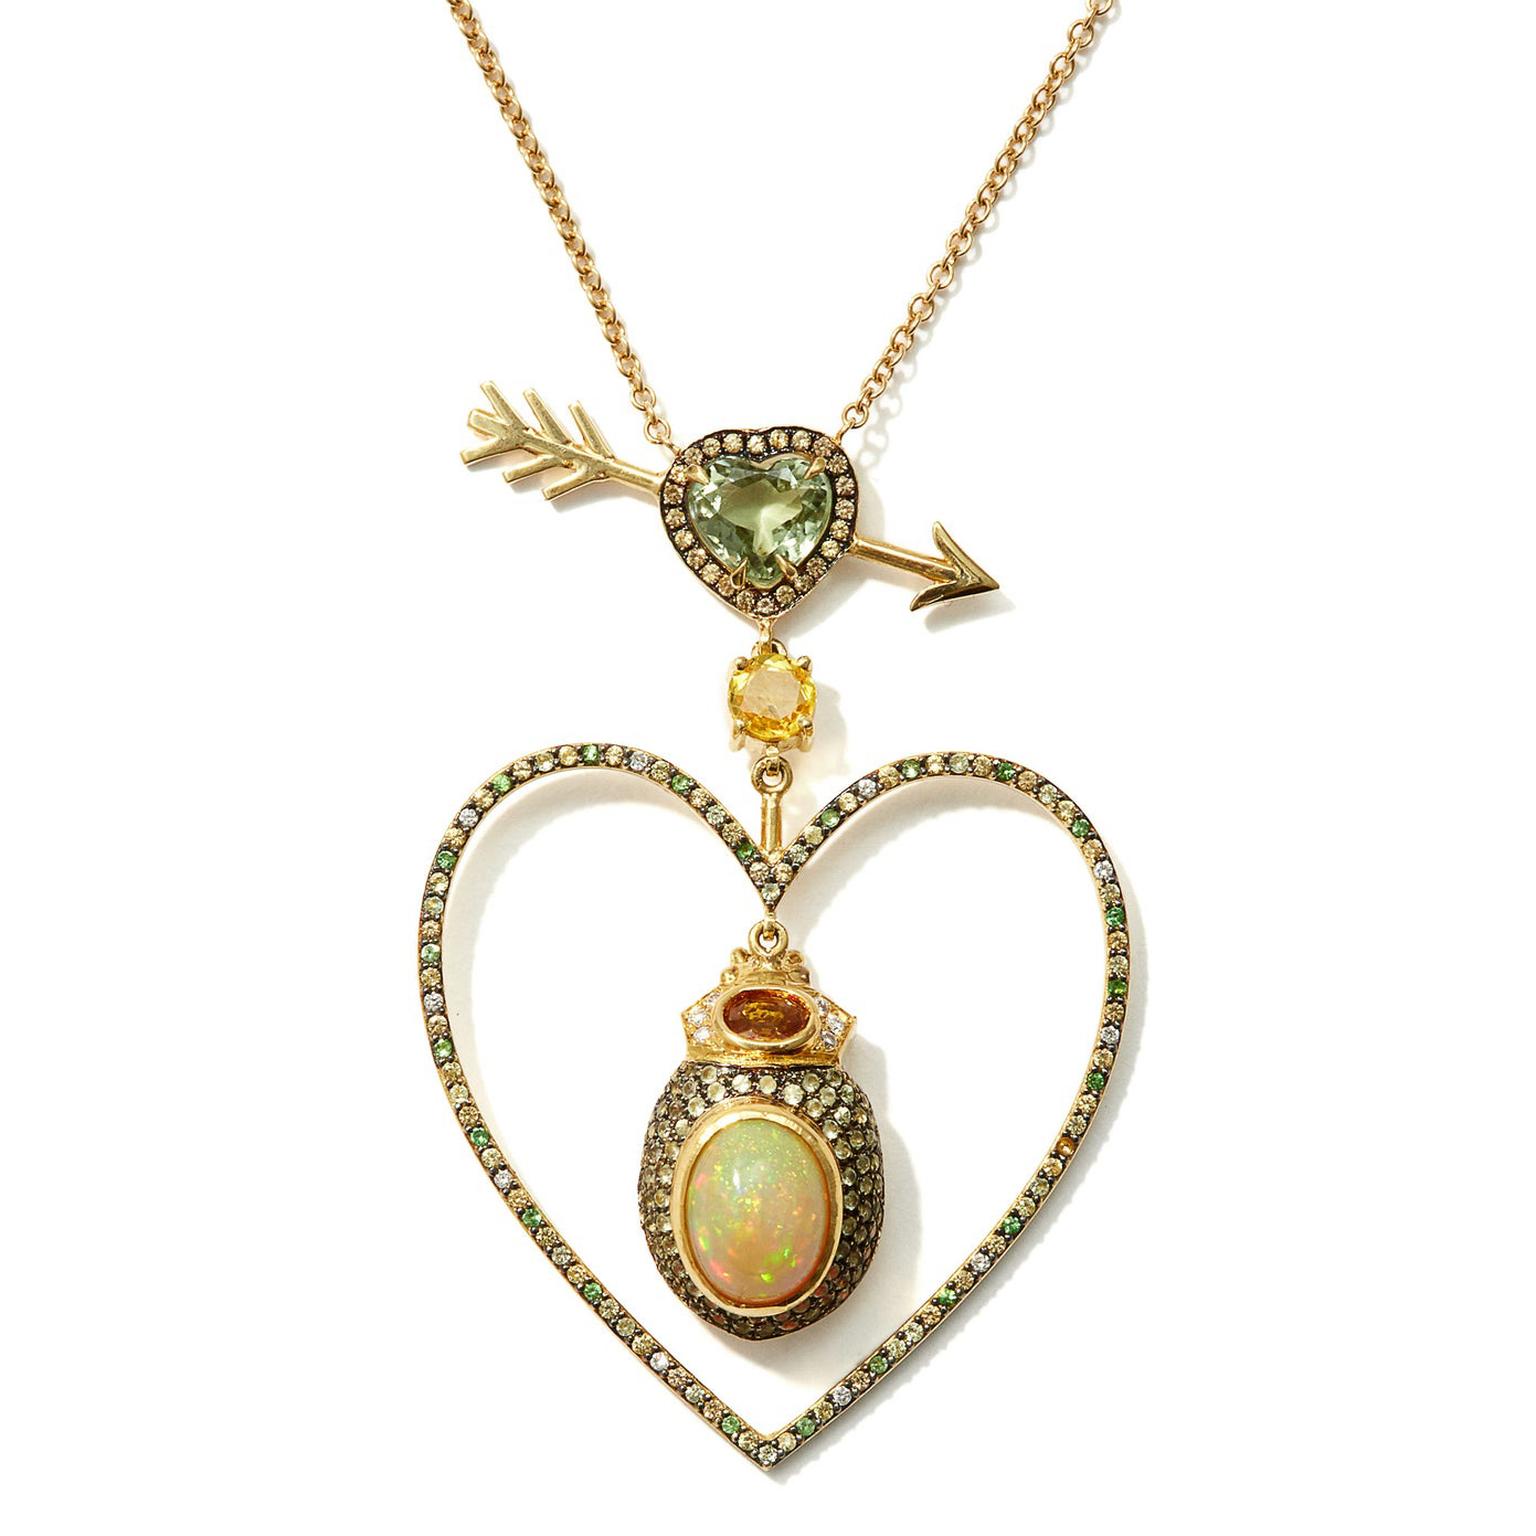 Beaming Love necklace by Daniela Villegas